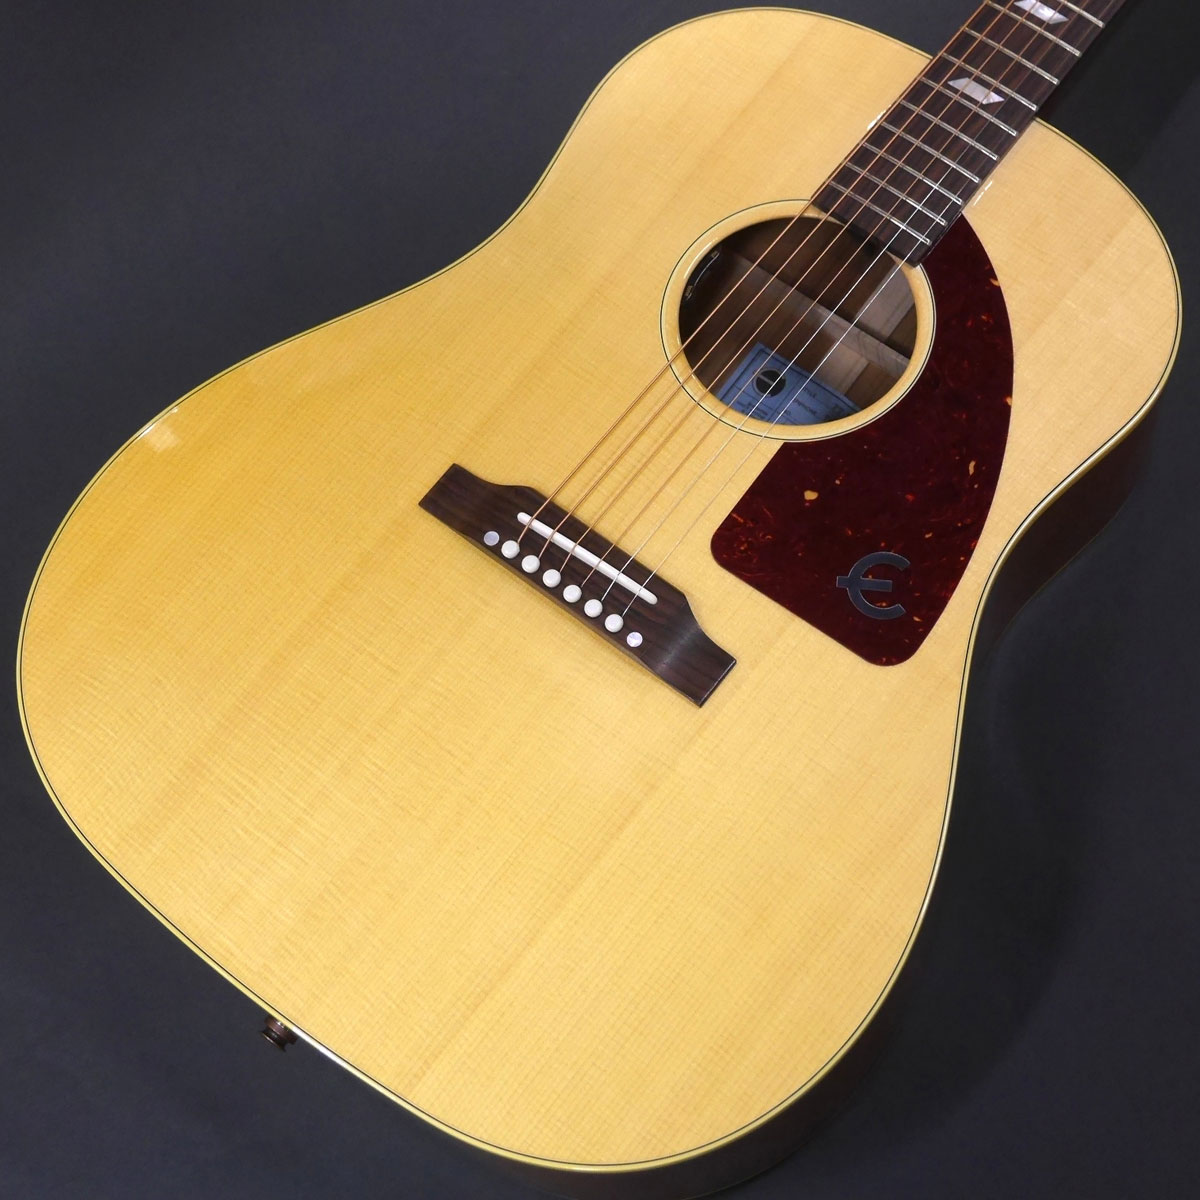 Epiphone USA / Texan AN(Antique Natural) FT79 エピフォン【S/N 20590062】【新宿店】